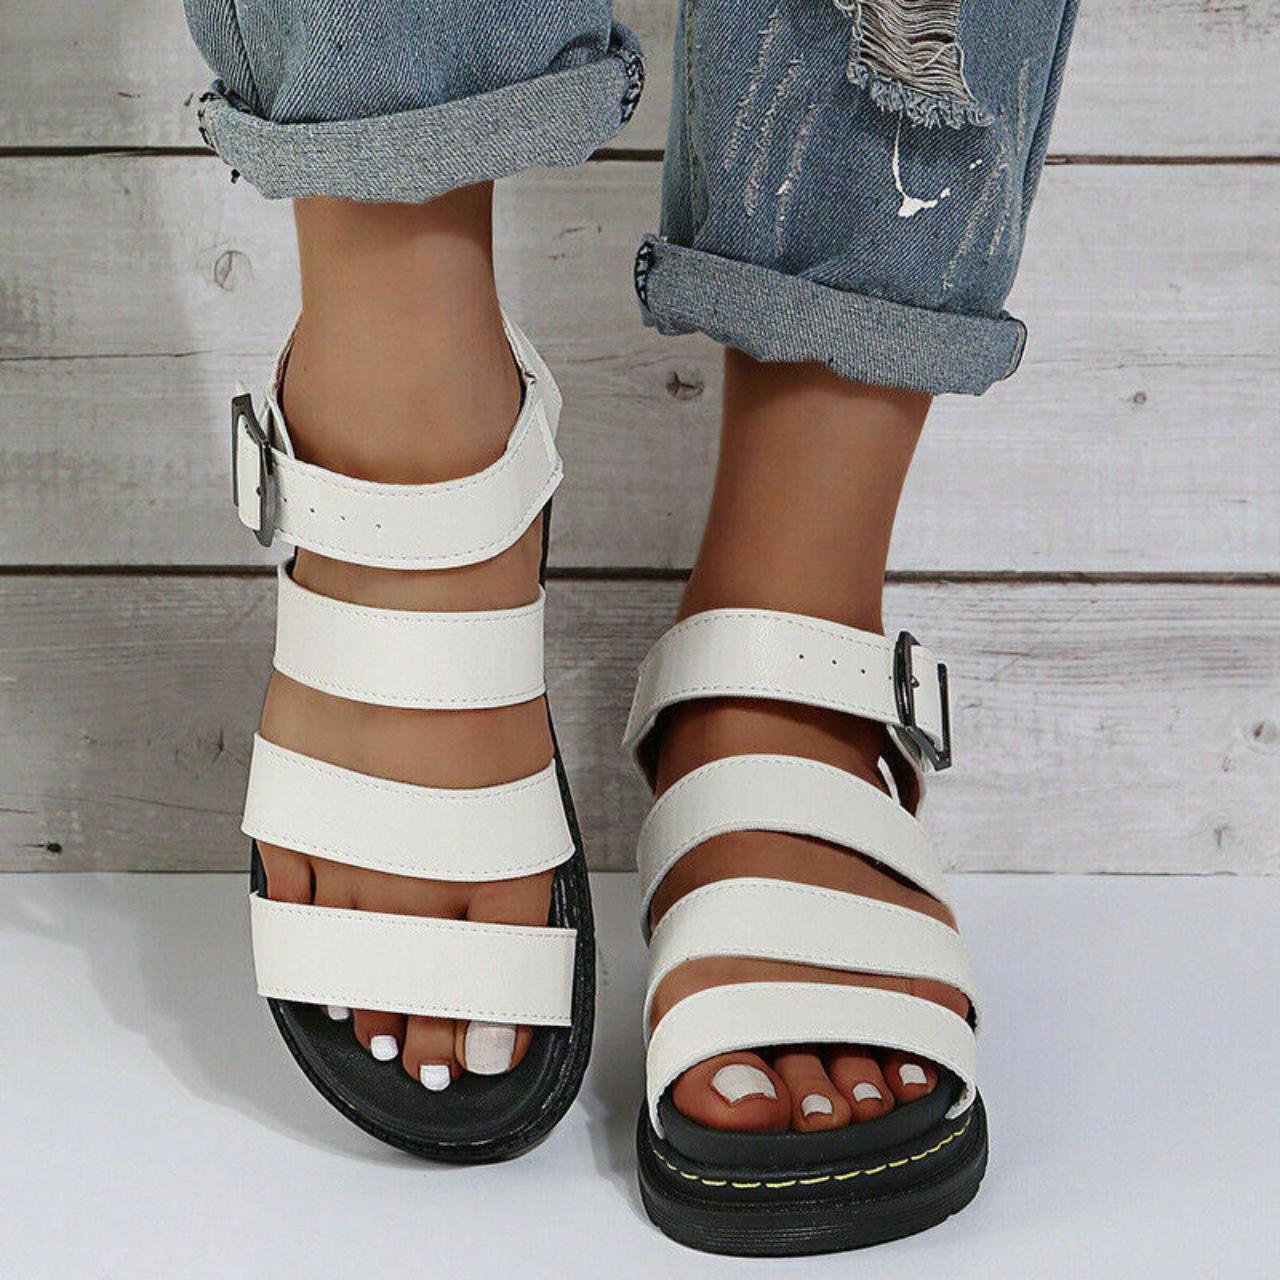 Womens Chunky Sandals Thick Sole Strappy Block... - Depop